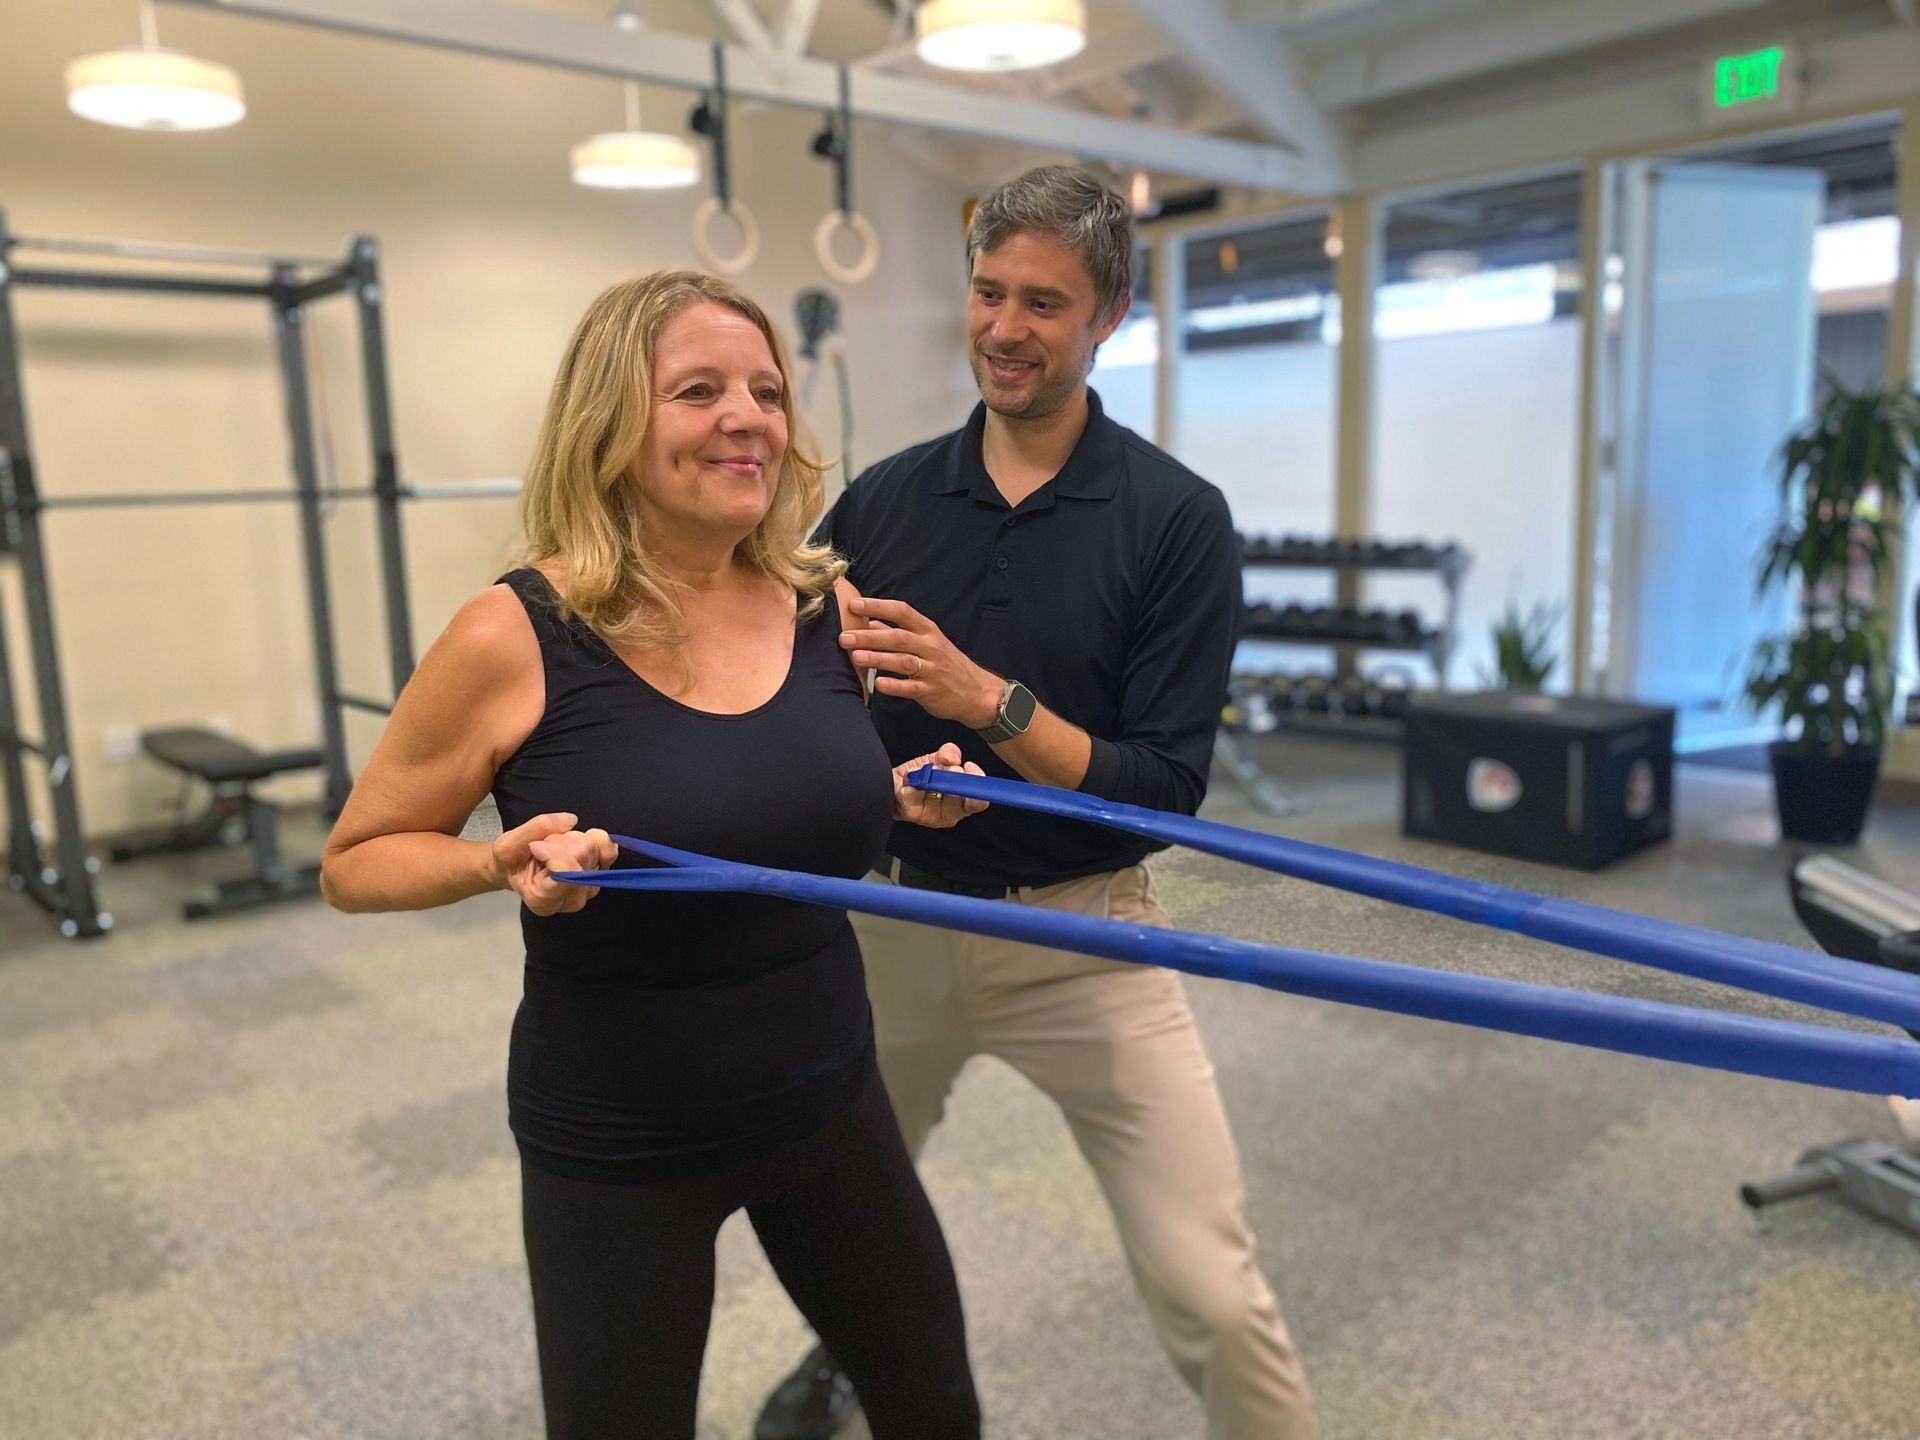 What interventions does a neurological rehabilitation specialist employ to help individuals with spinal cord injuries regain mobility and independence?